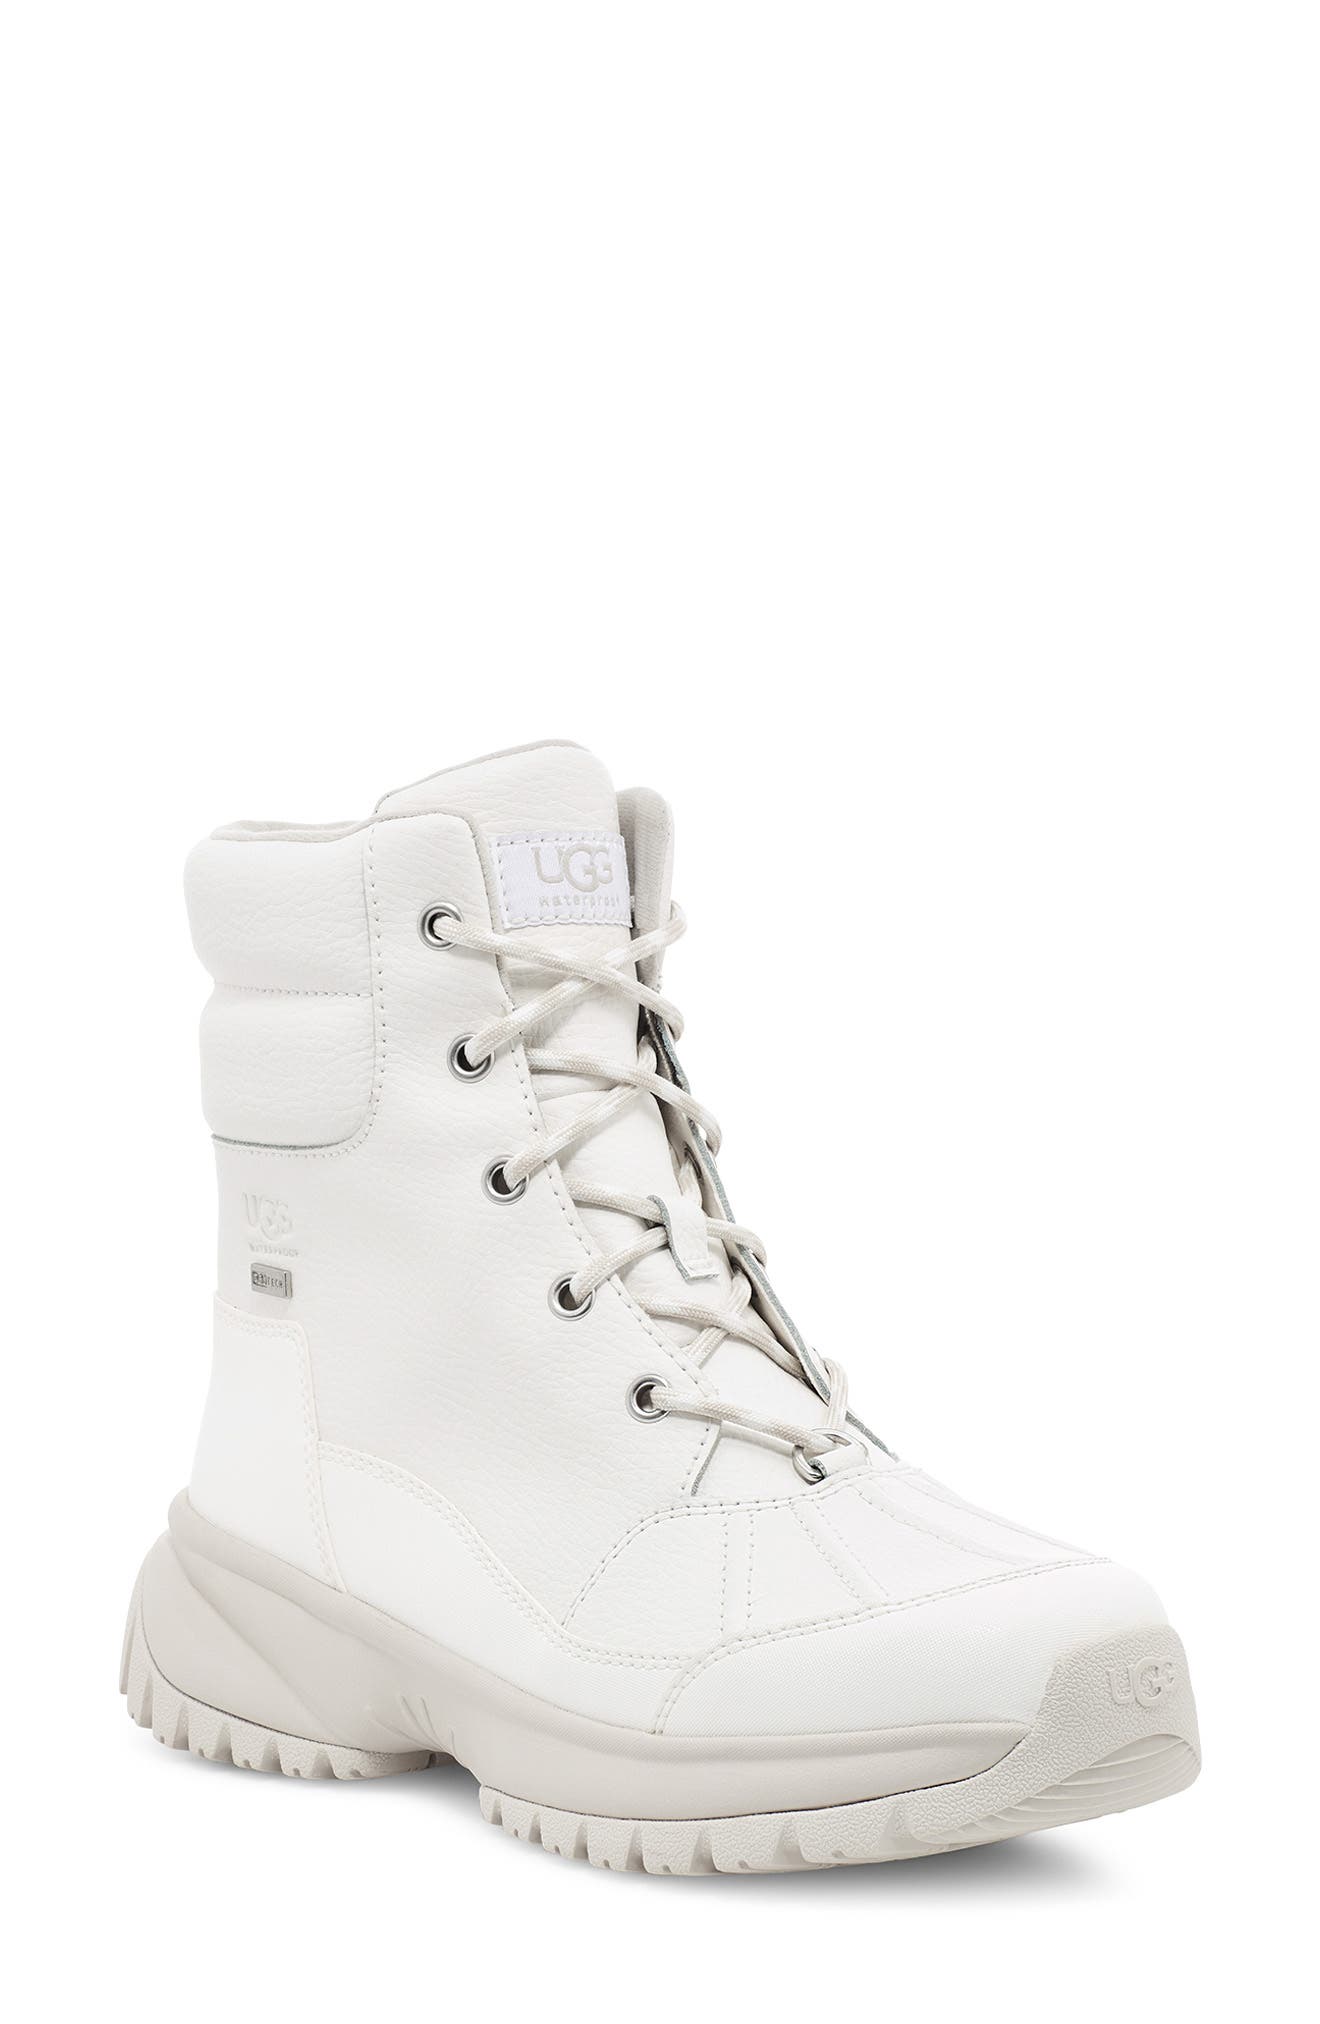 ugg lace up boots womens